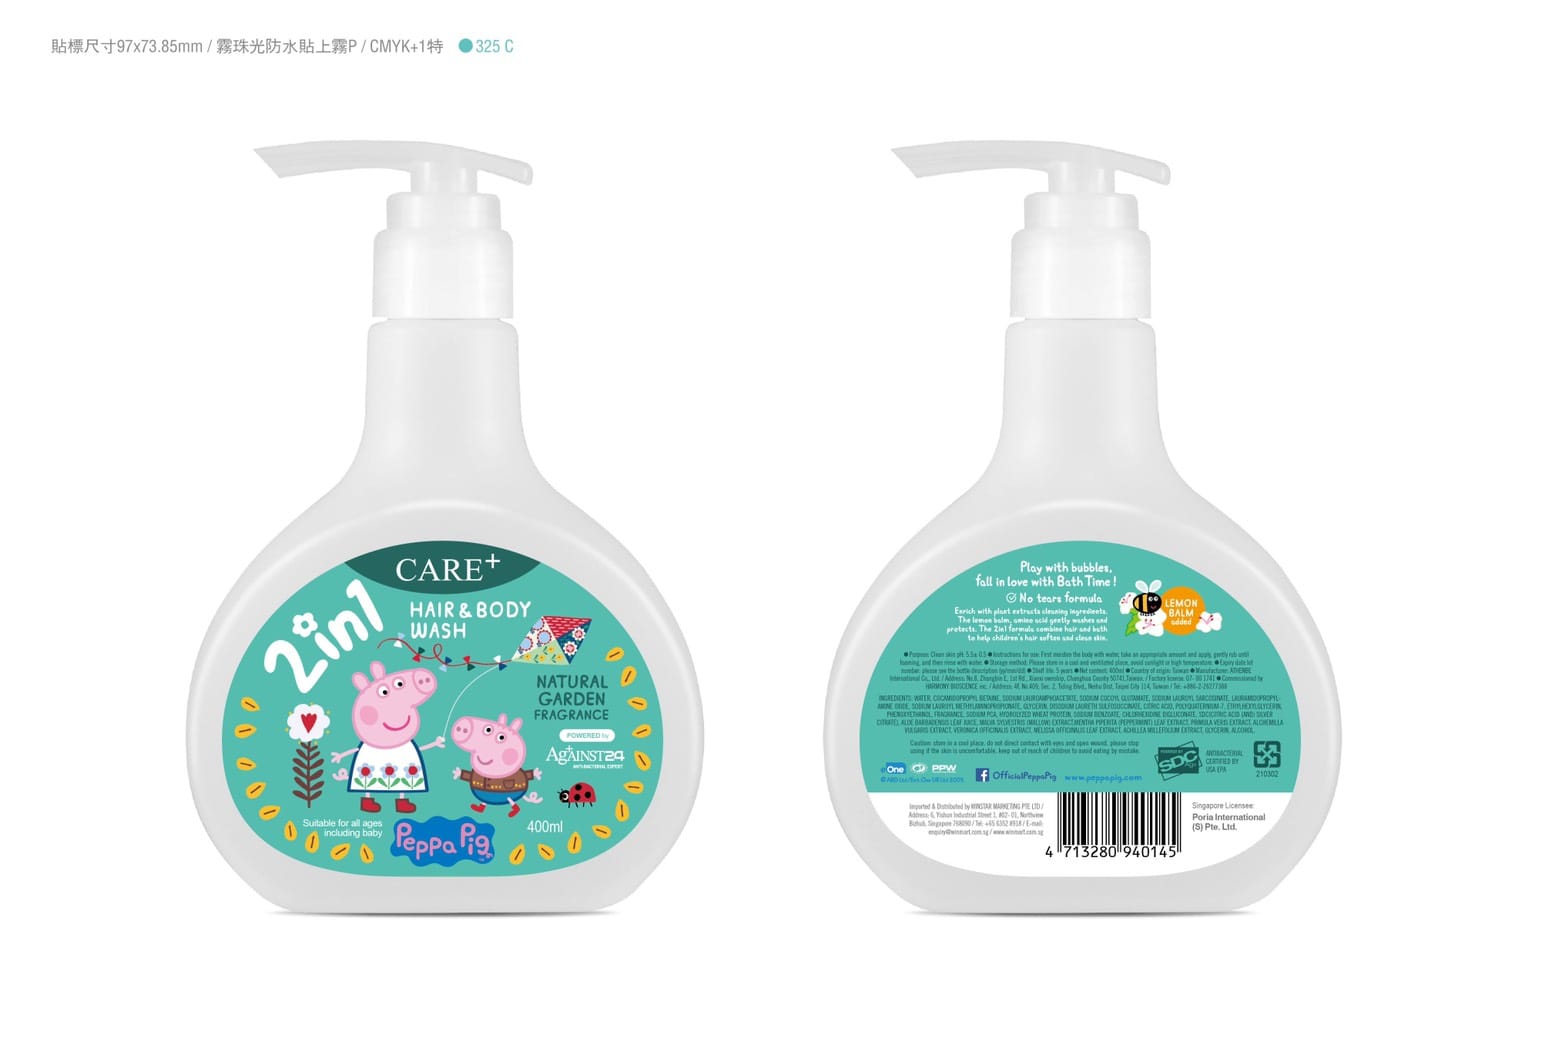 Care+ Peppa Pig 2In1 Hair & Body Wash - Natural Garden (Bundle of 2)